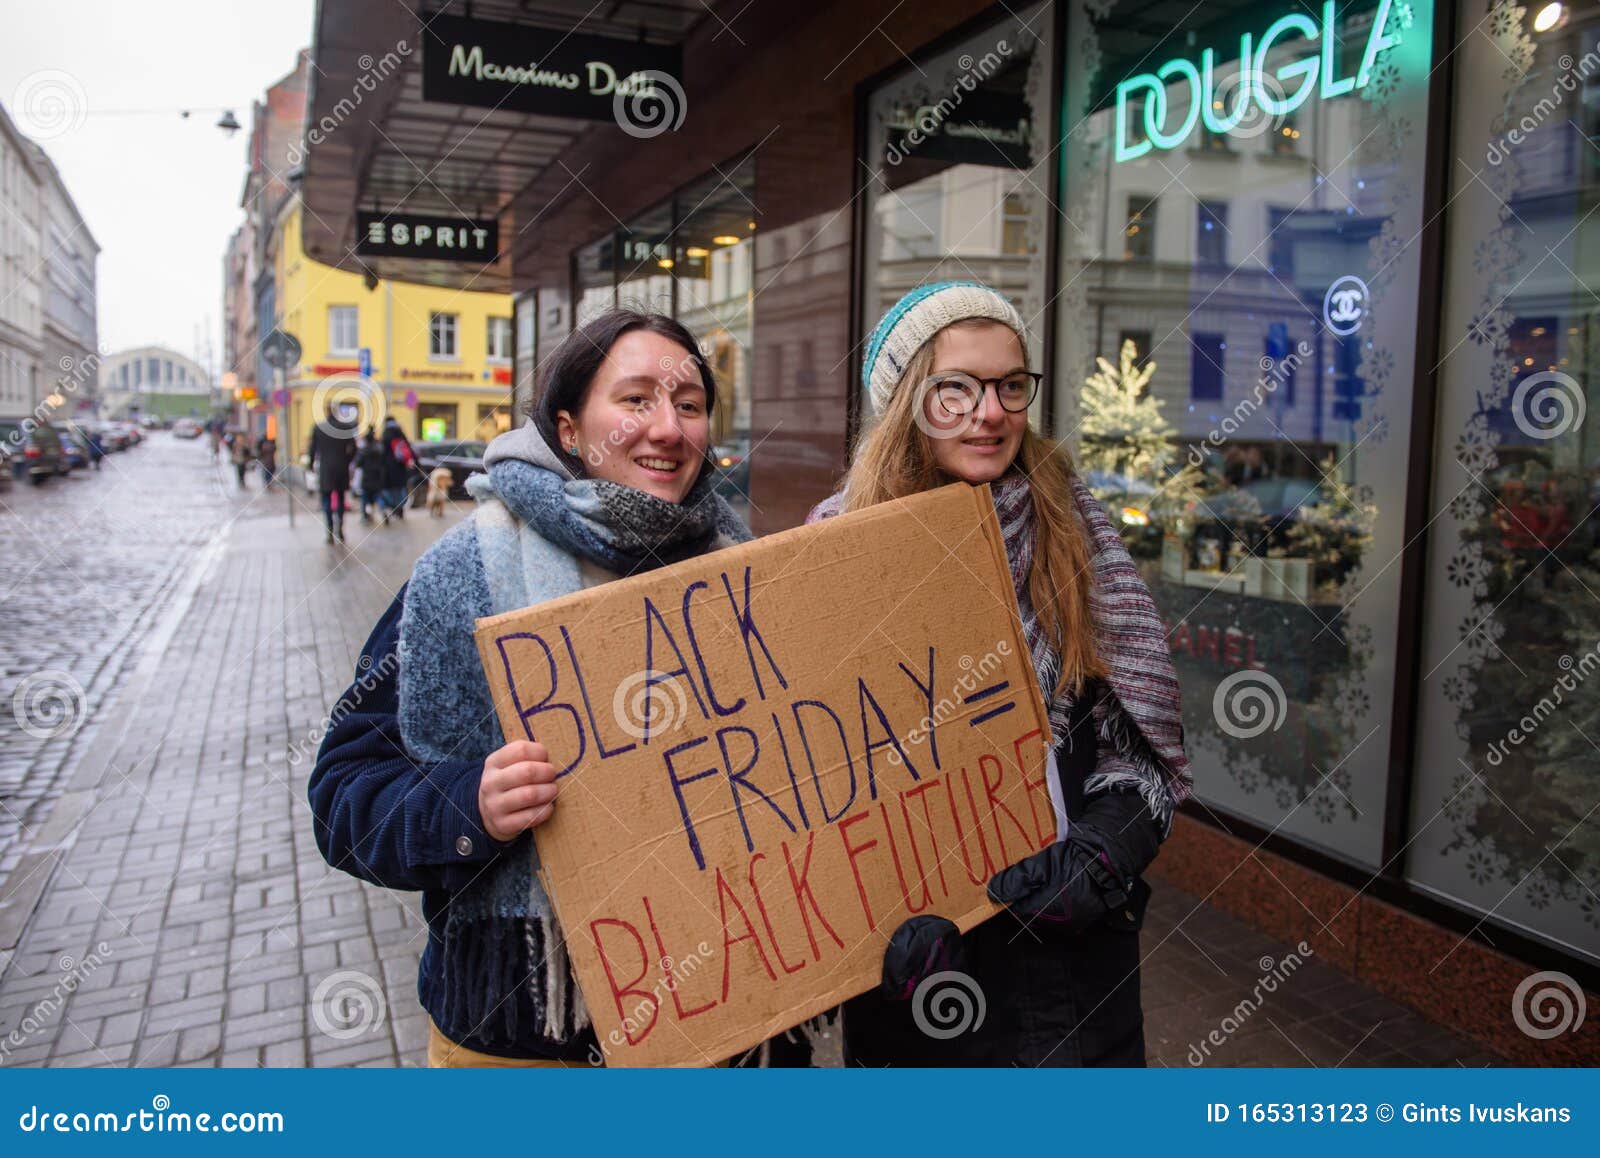 Readability Captain brie rotation 4th Global Climate Strike and Black Friday Protest in Riga, Latvia  Editorial Stock Photo - Image of news, change: 165313123